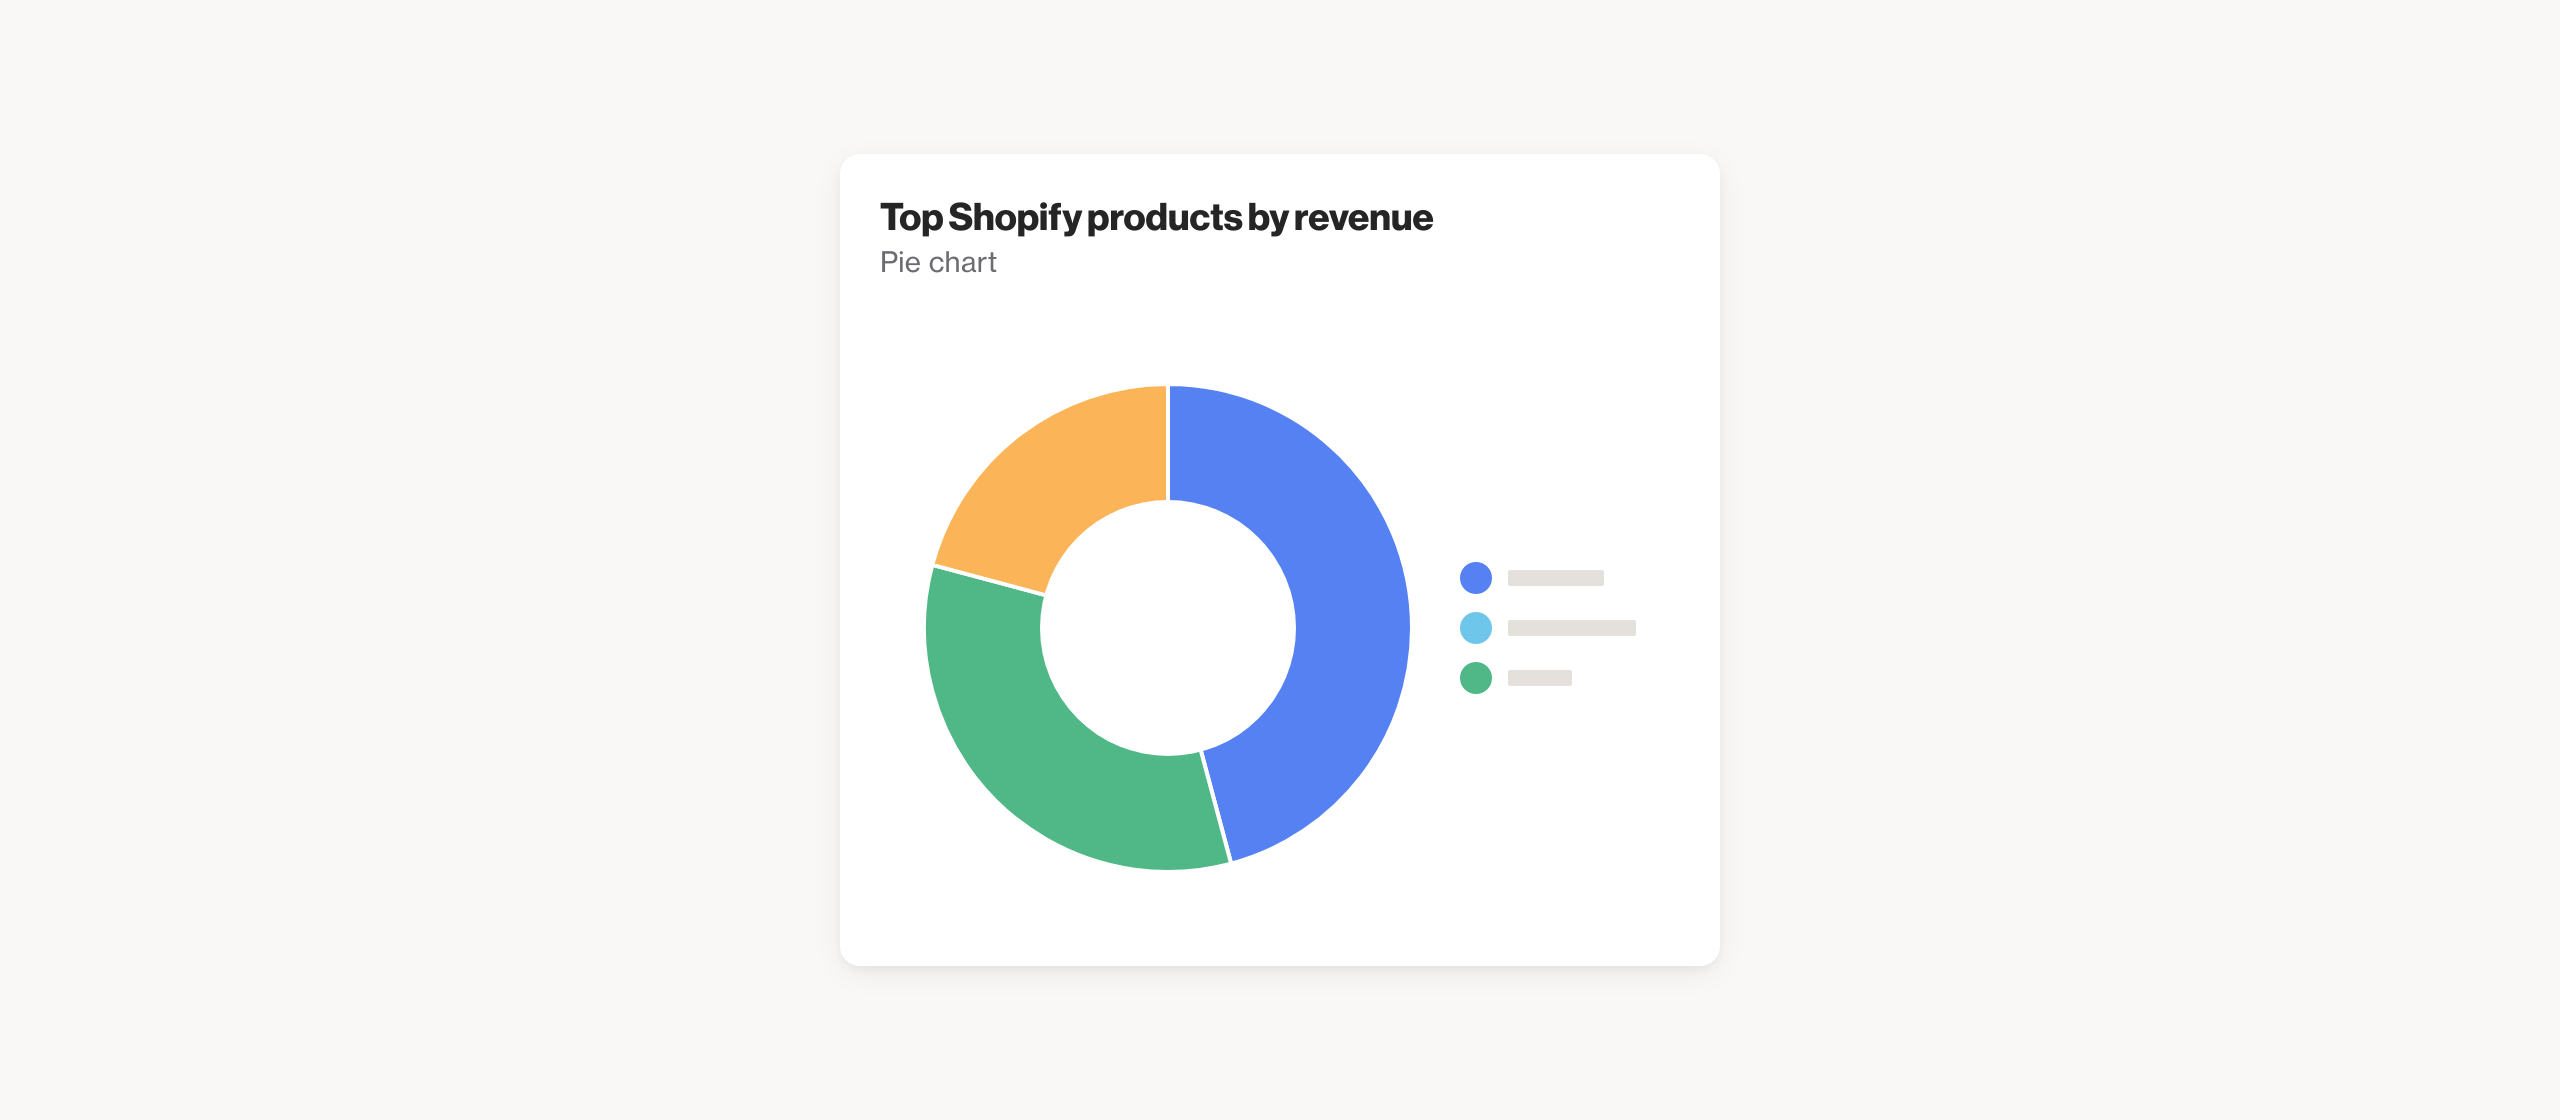 Top Shopify products by revenue